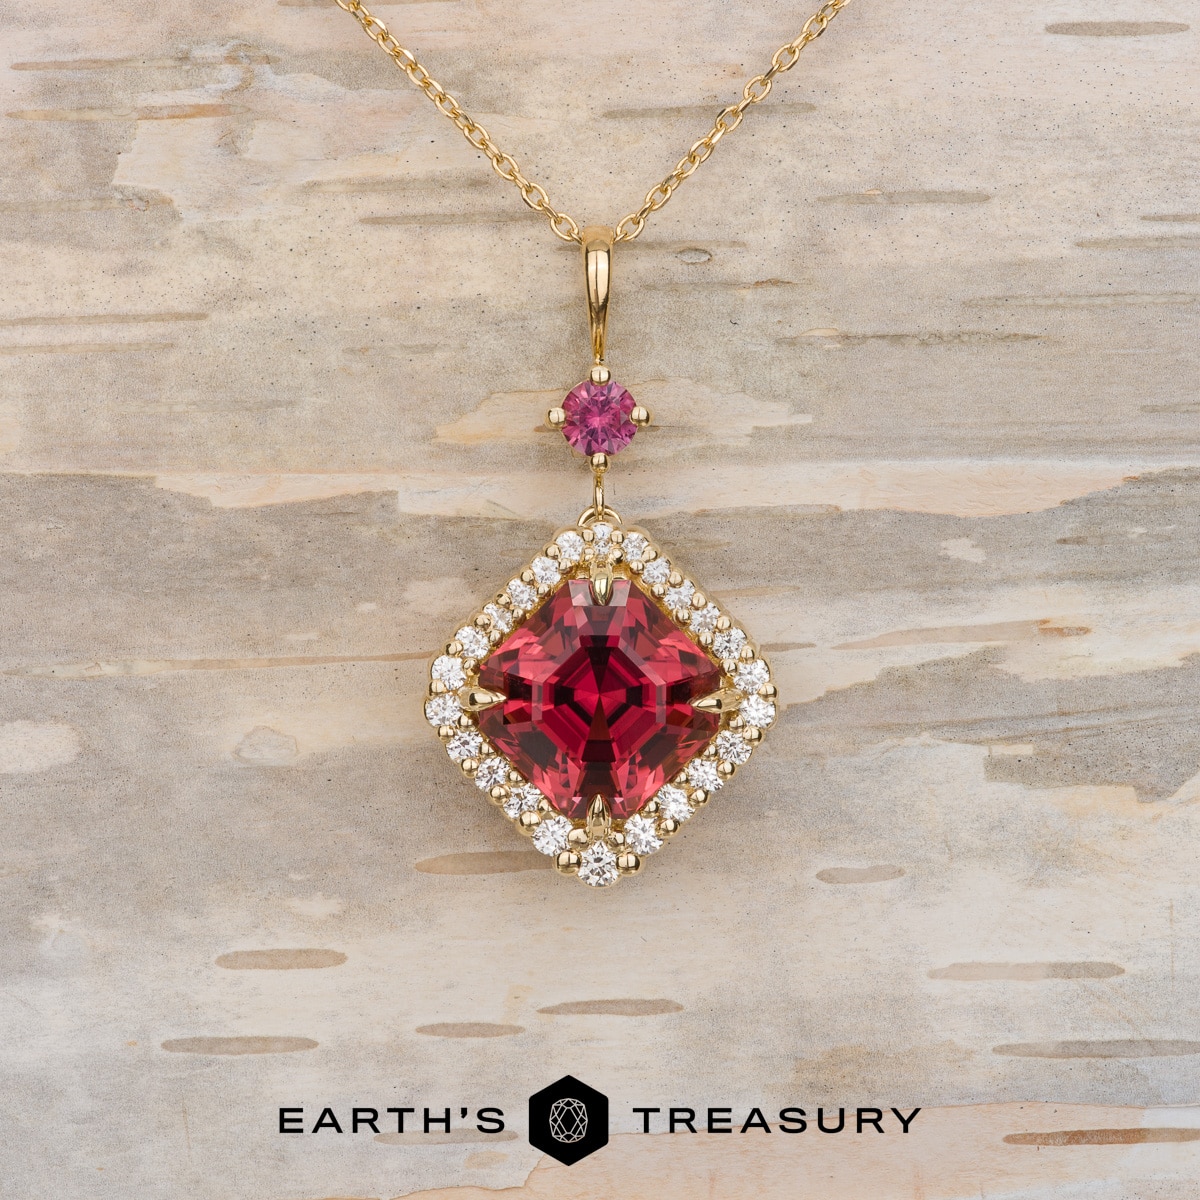 A custom necklace in 18k yellow gold featuring a 4.62-carat tourmaline